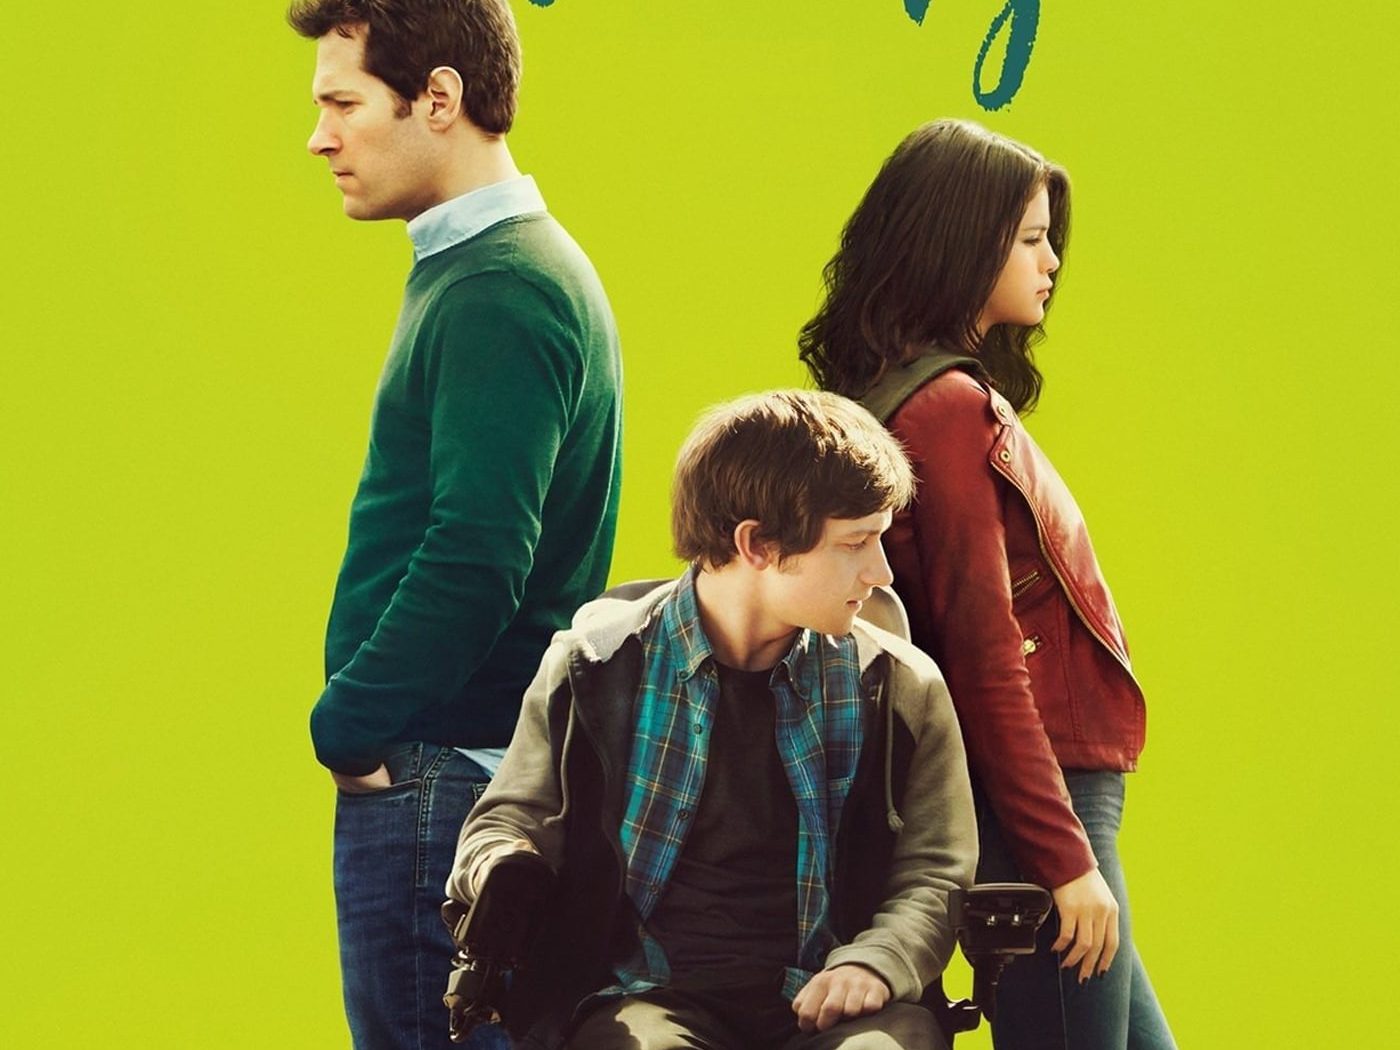 Poster for the movie "The Fundamentals of Caring"